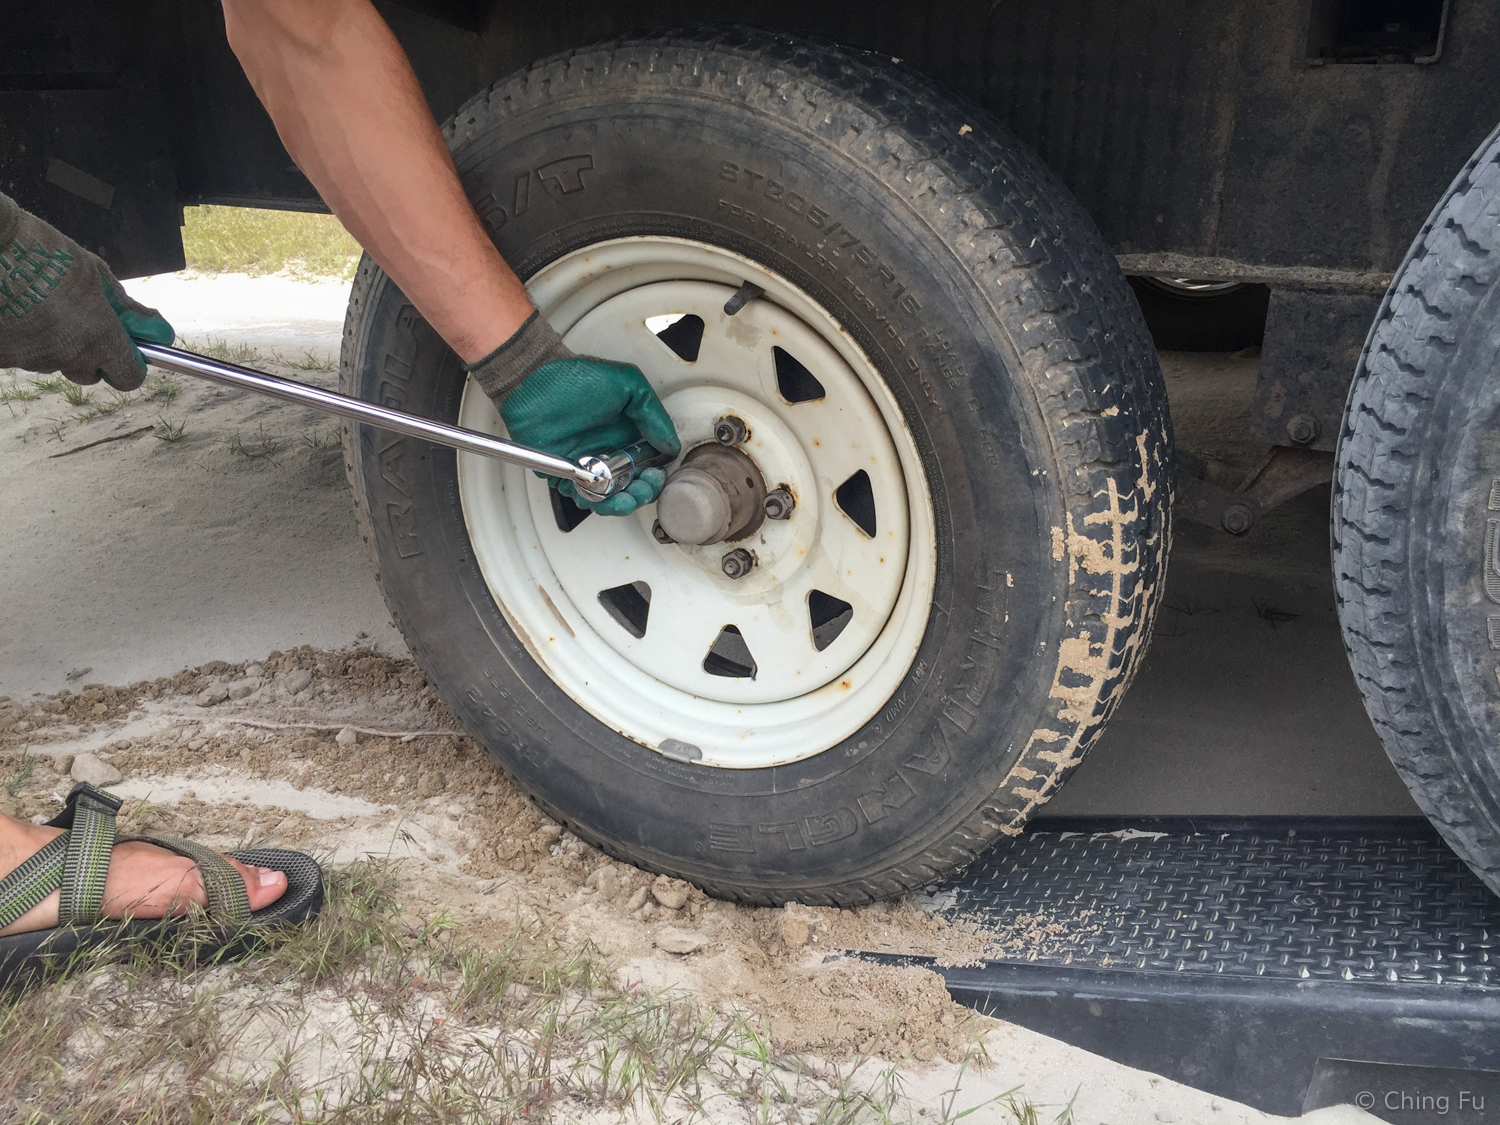  Step #11: Tighten the lug nuts. 